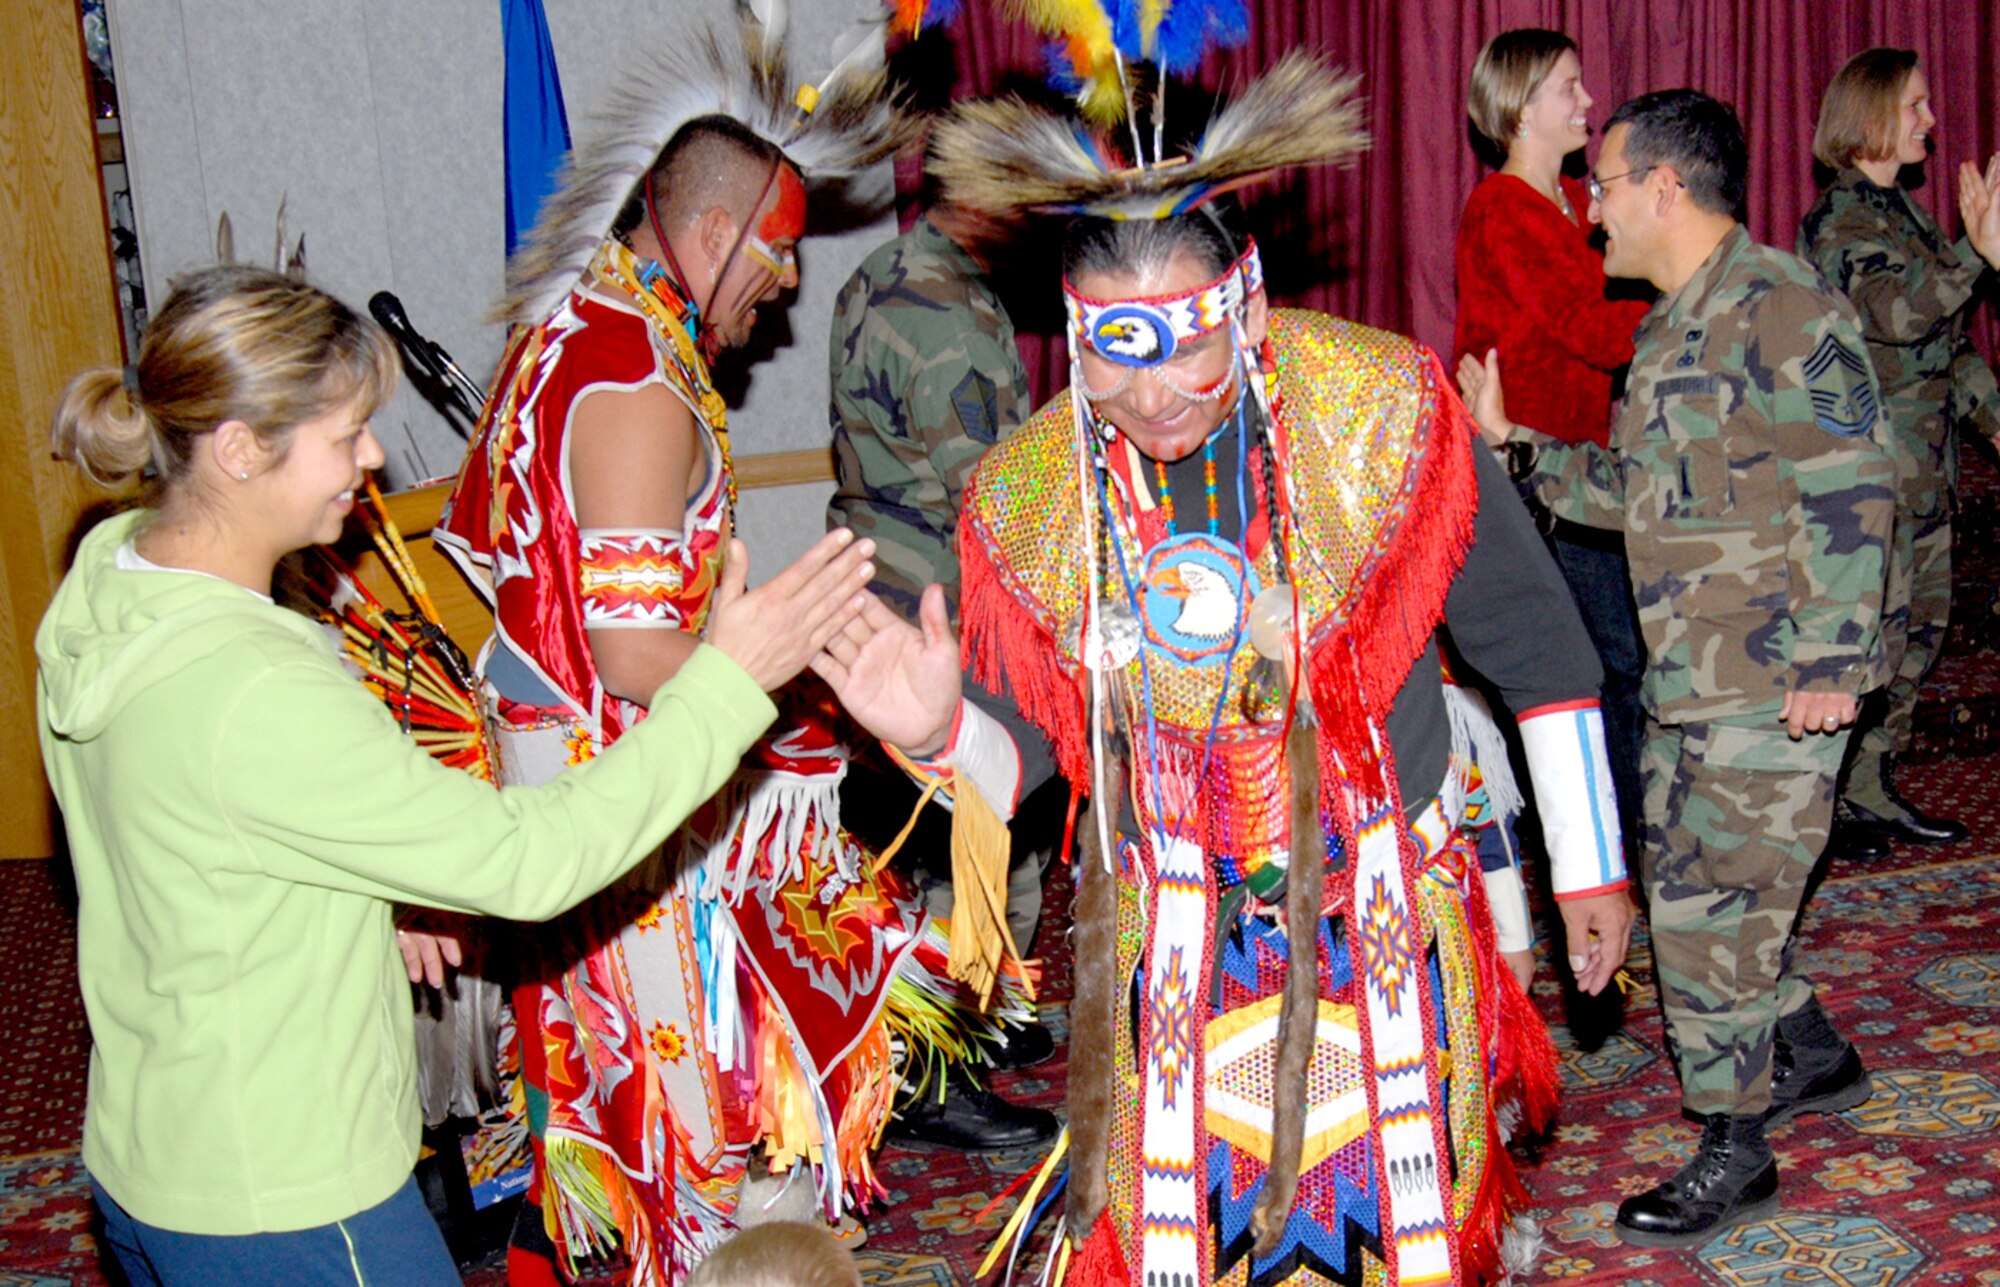 For the last dance of the Native American Pow-wow, Harvey Spoonhunter leads the audience in a circle dance where everyone greets each other. The pow-wow took place at the Trail’s End Club Nov. 27 and ended Native American Heritage Month (Photo by Berni Ernst).